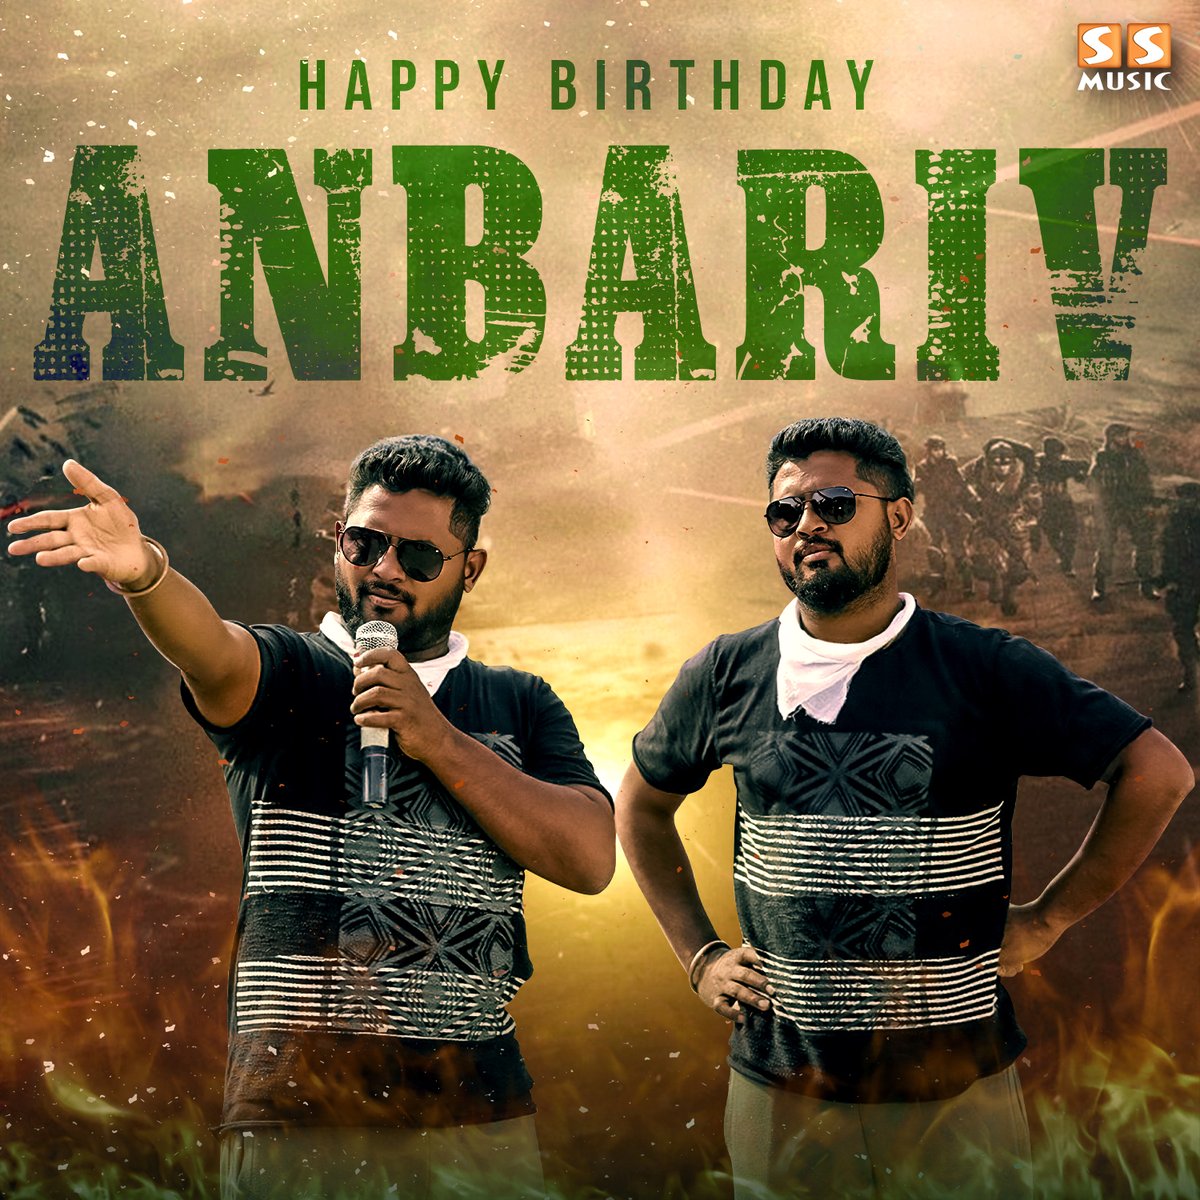 Wishing a Very Happy Birthday To The Action Brothers @anbariv 🤩🔥
.
#HBDAnbariv #HappyBirthdayAnbariv #AnbarivMasters #AnbarivStunts #Anbariv #SSMusic